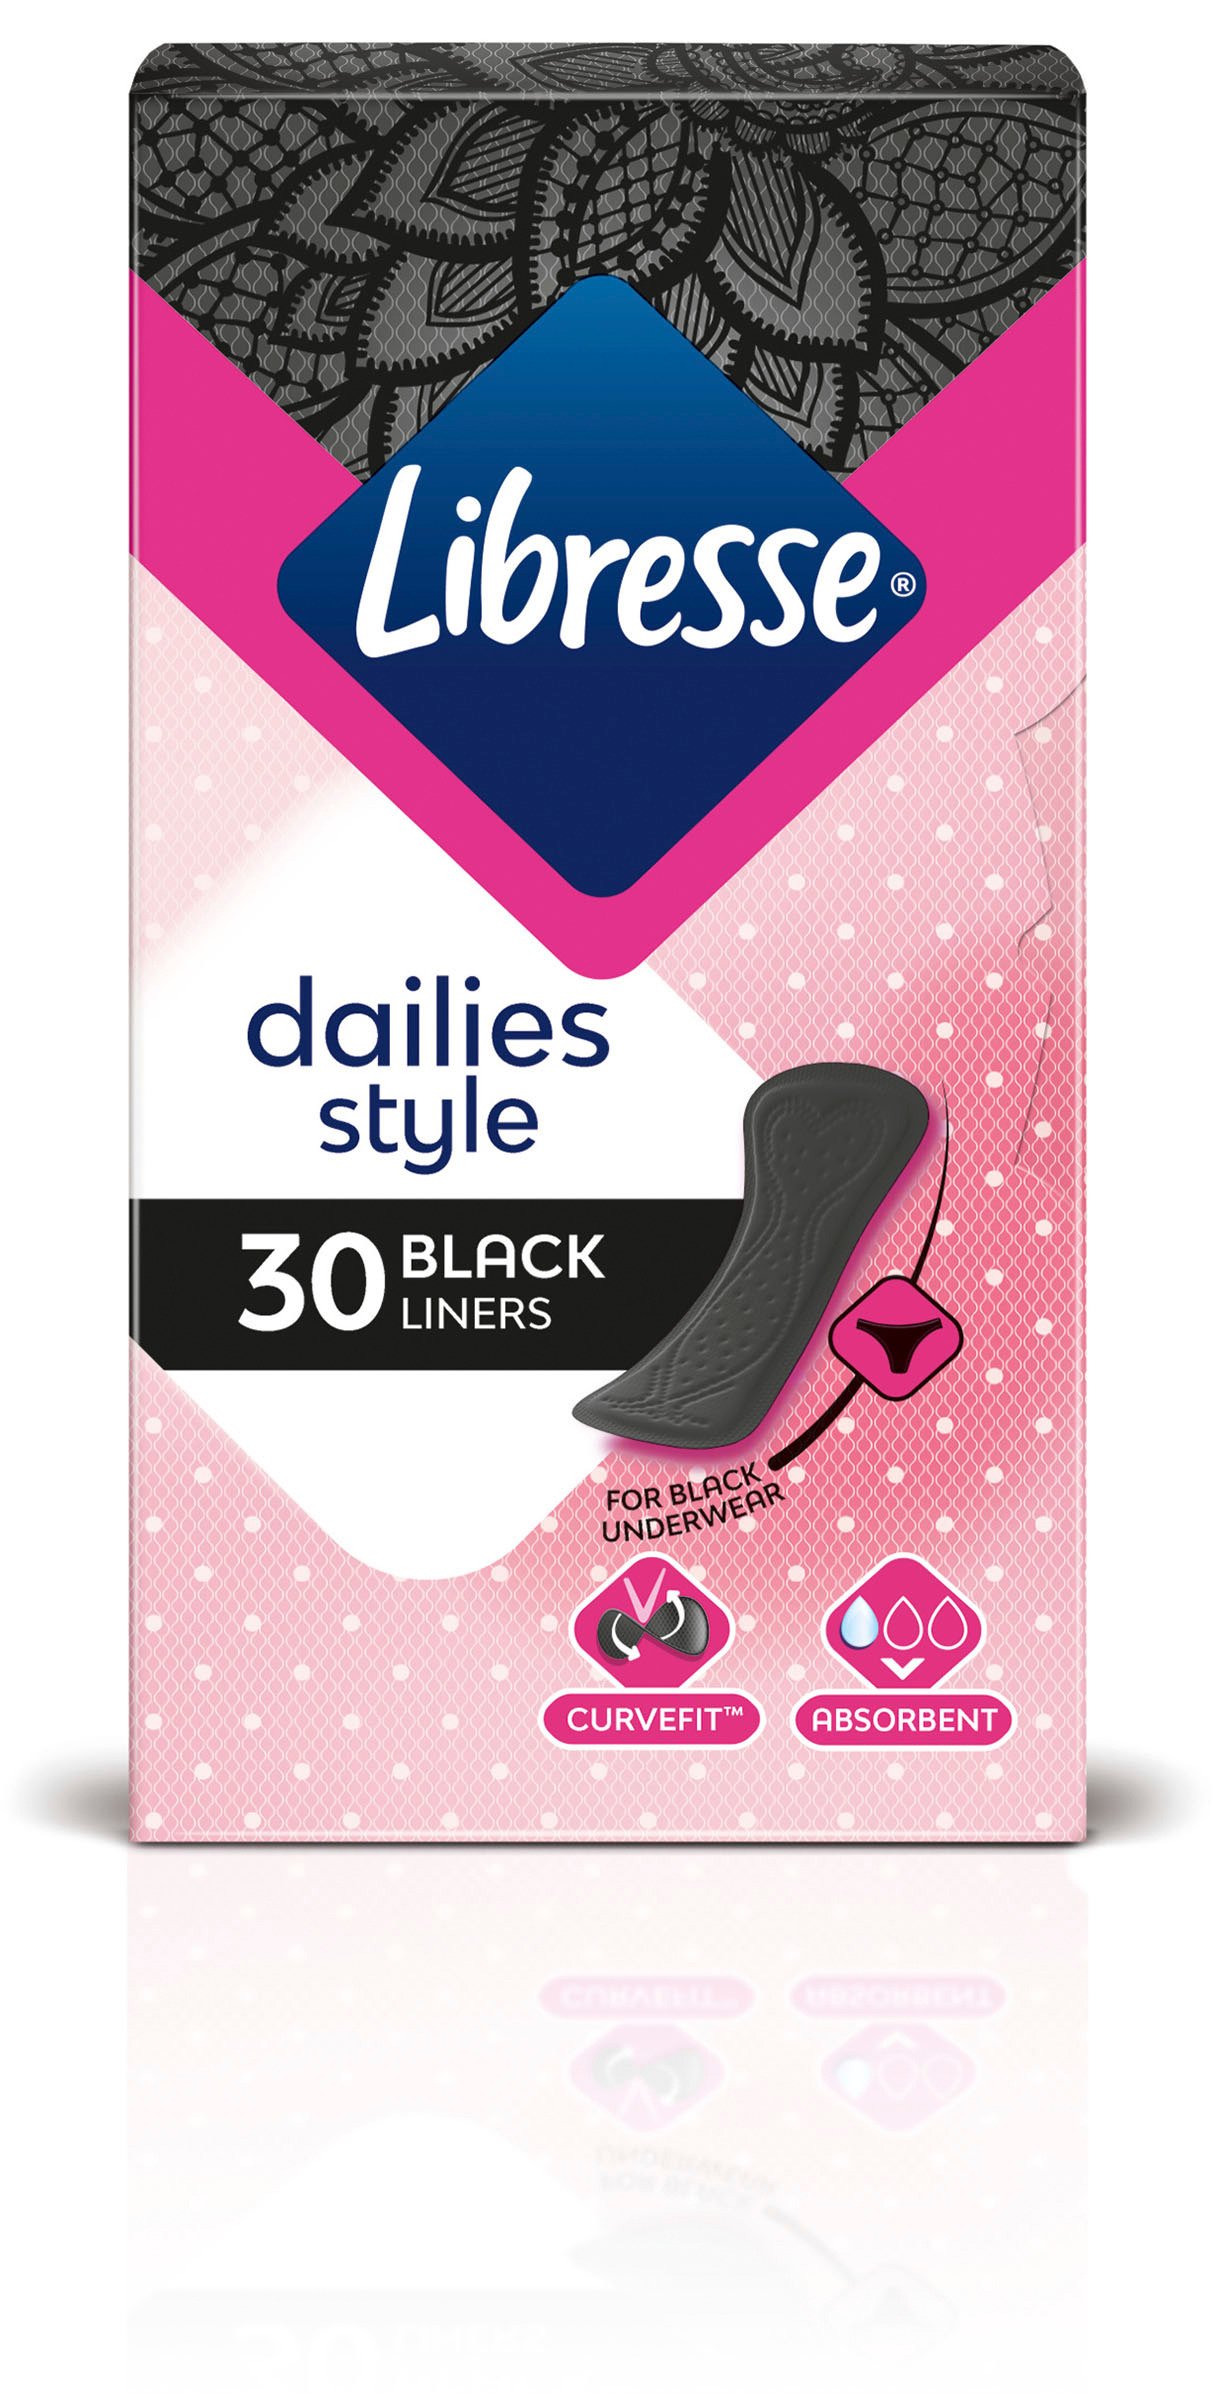 Libresse Dailies Style Black Normal Trosskydd 30 st